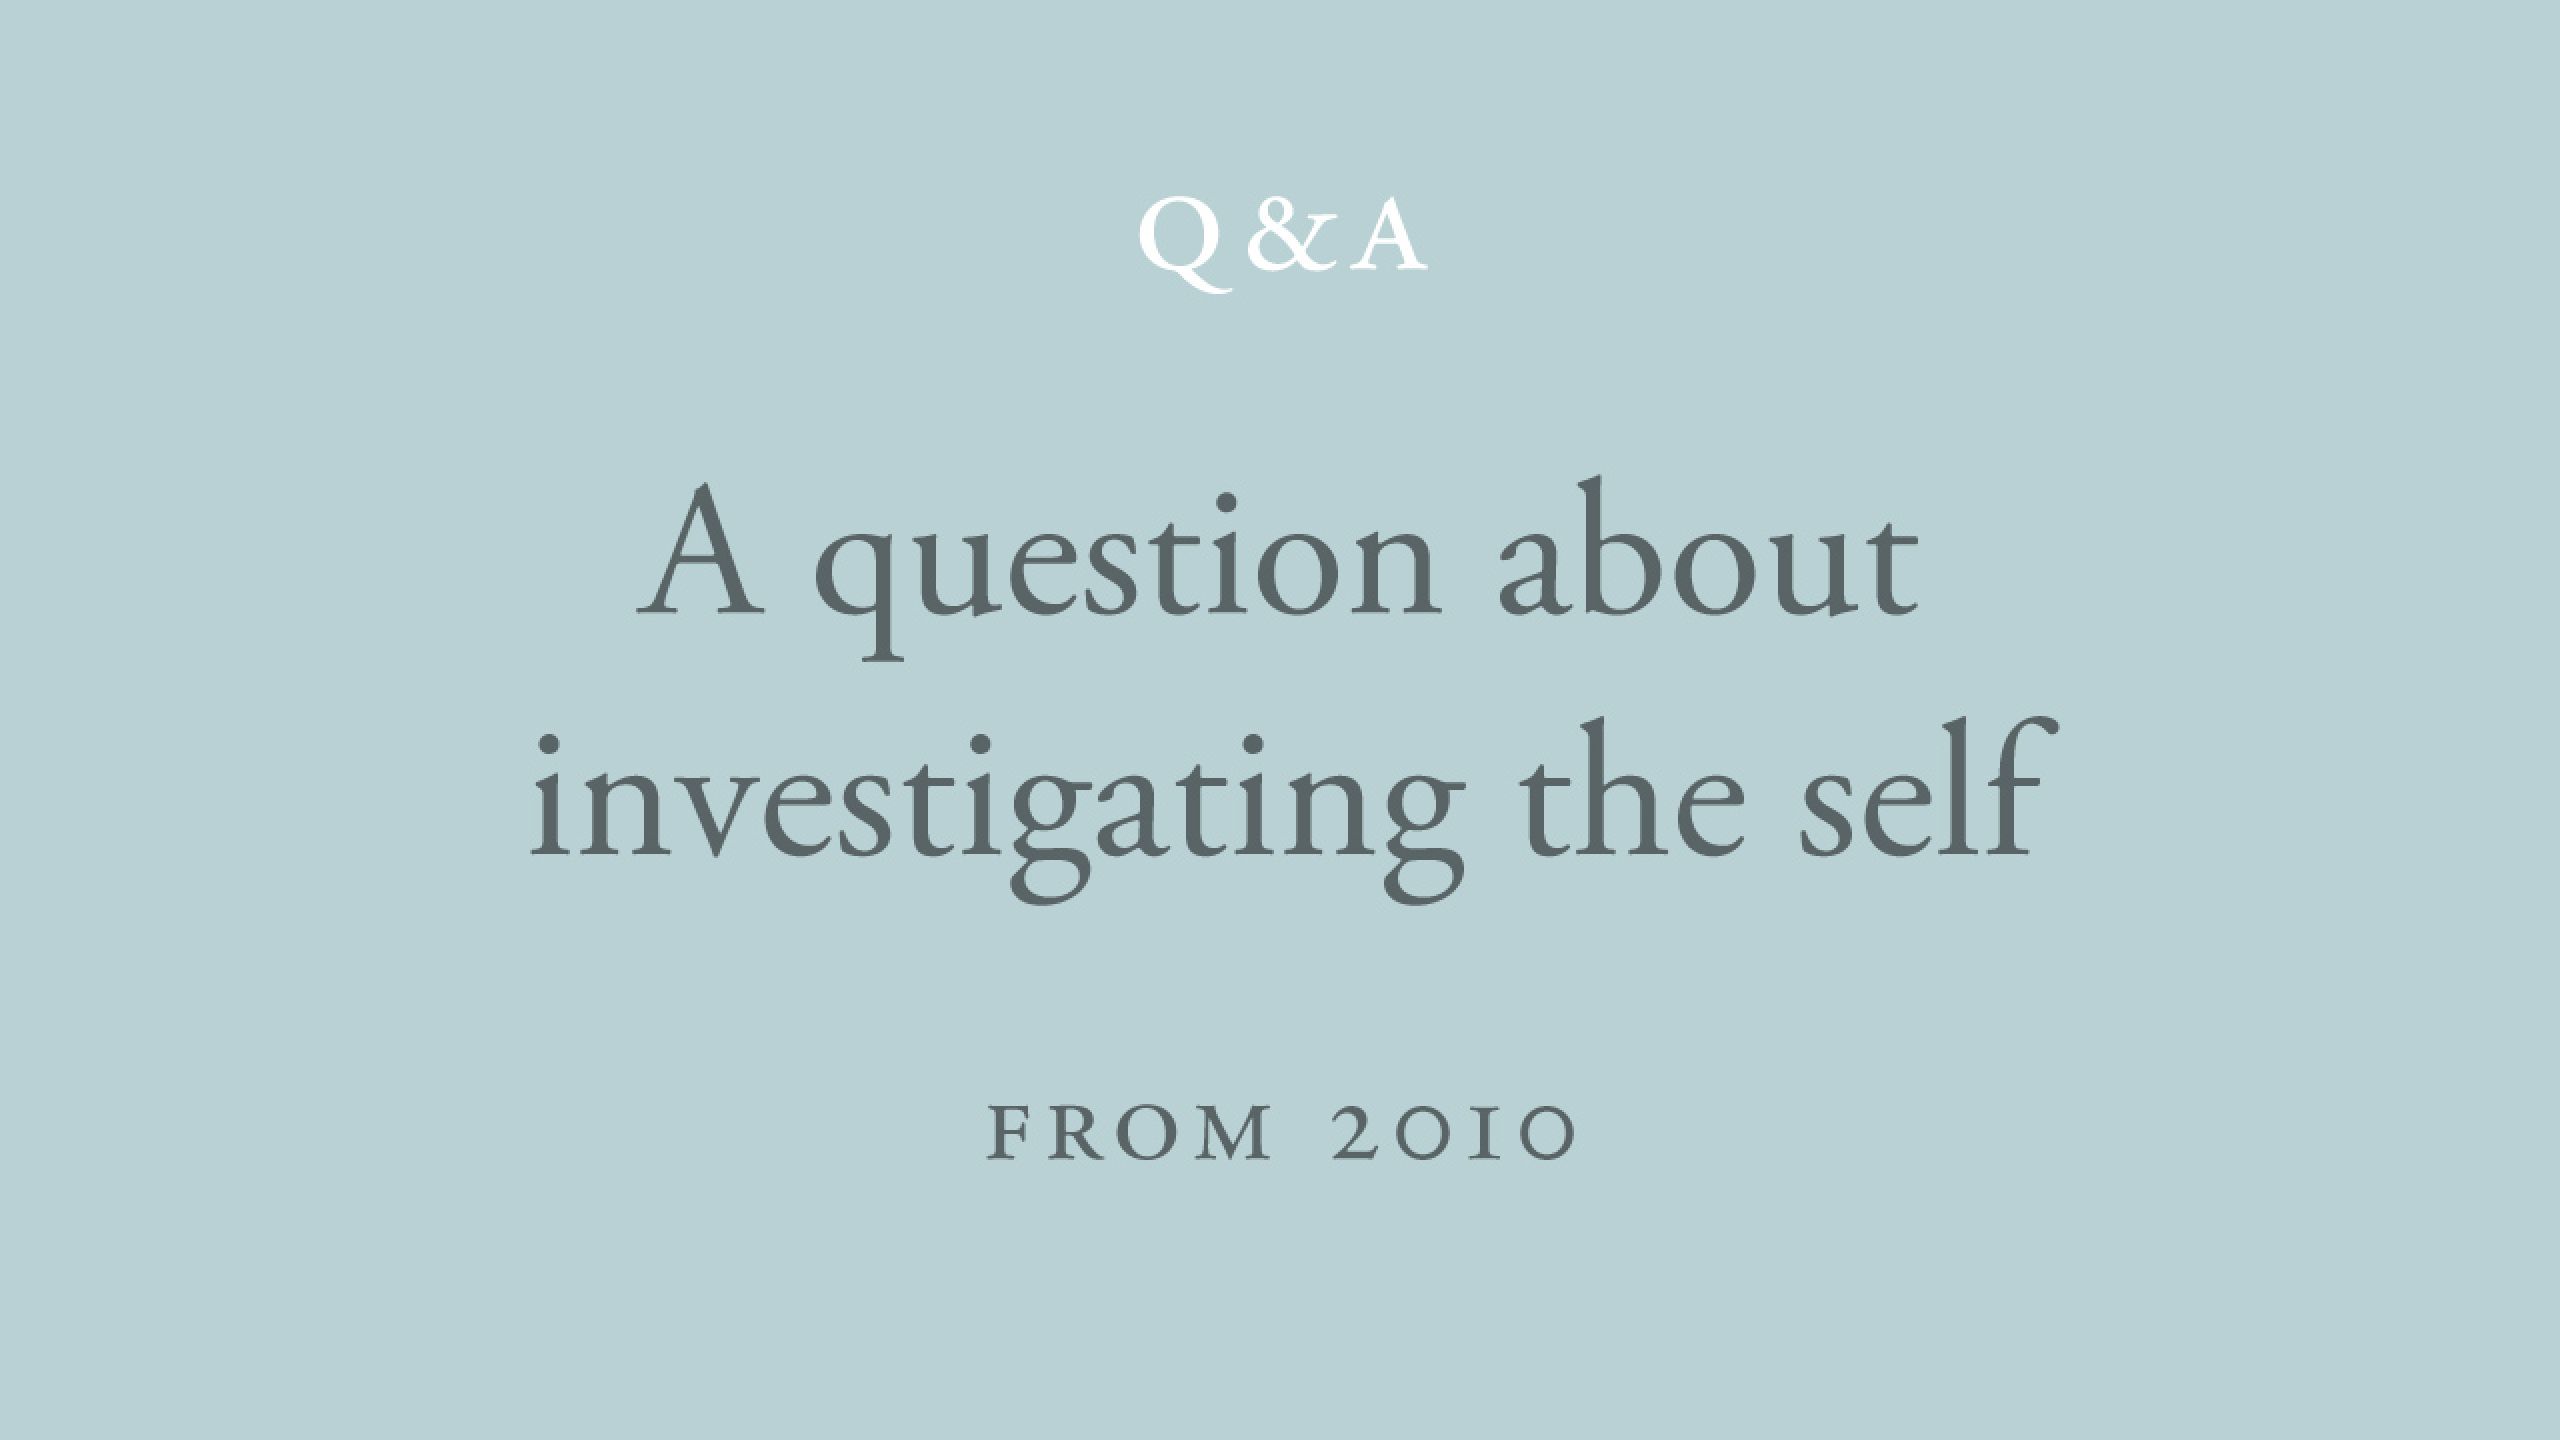 Is it possible to investigate the self without an agenda? 